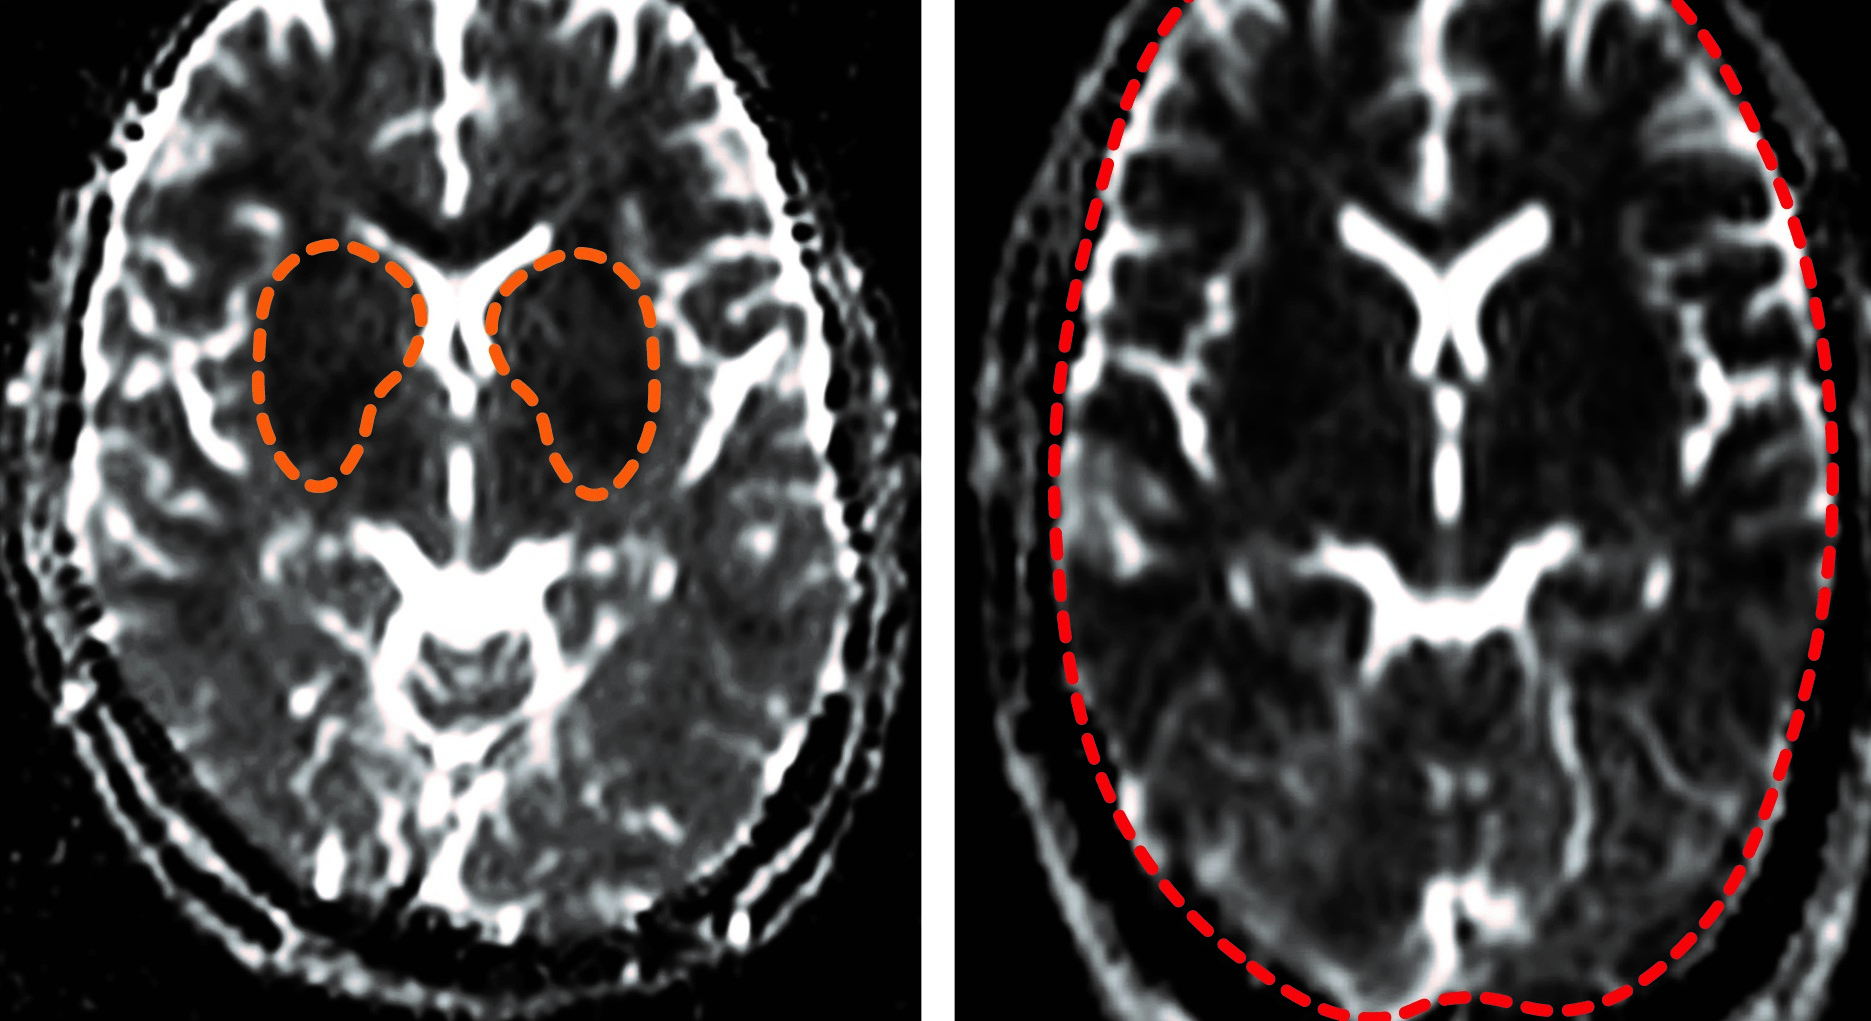 Transient oxygen deprivation is seen in the basal ganglia part of the brain in adults with non-fatal cerebral malaria (darker areas highlighted, left). The authors showed for the first time that fatal cerebral malaria in adults is associated with a profound lack of oxygen seen in the whole brain (dark areas throughout the organ, right).